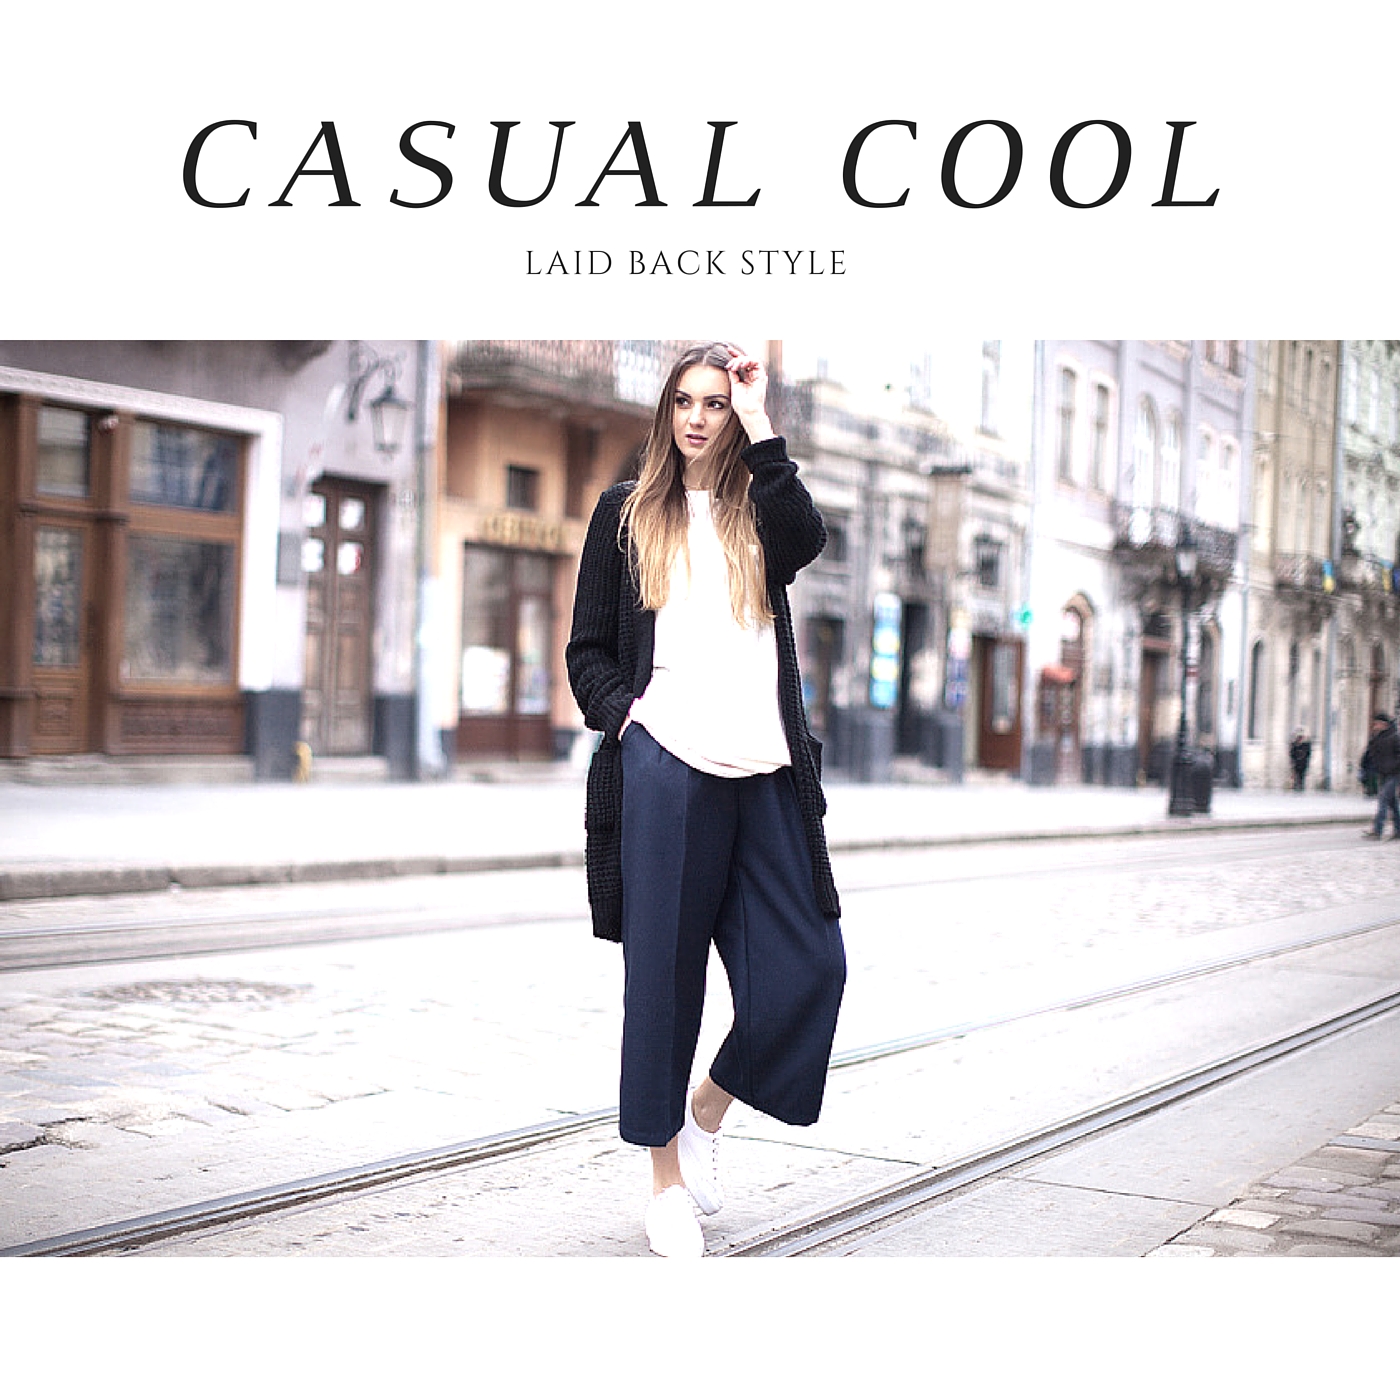 Casual culotte laid back style